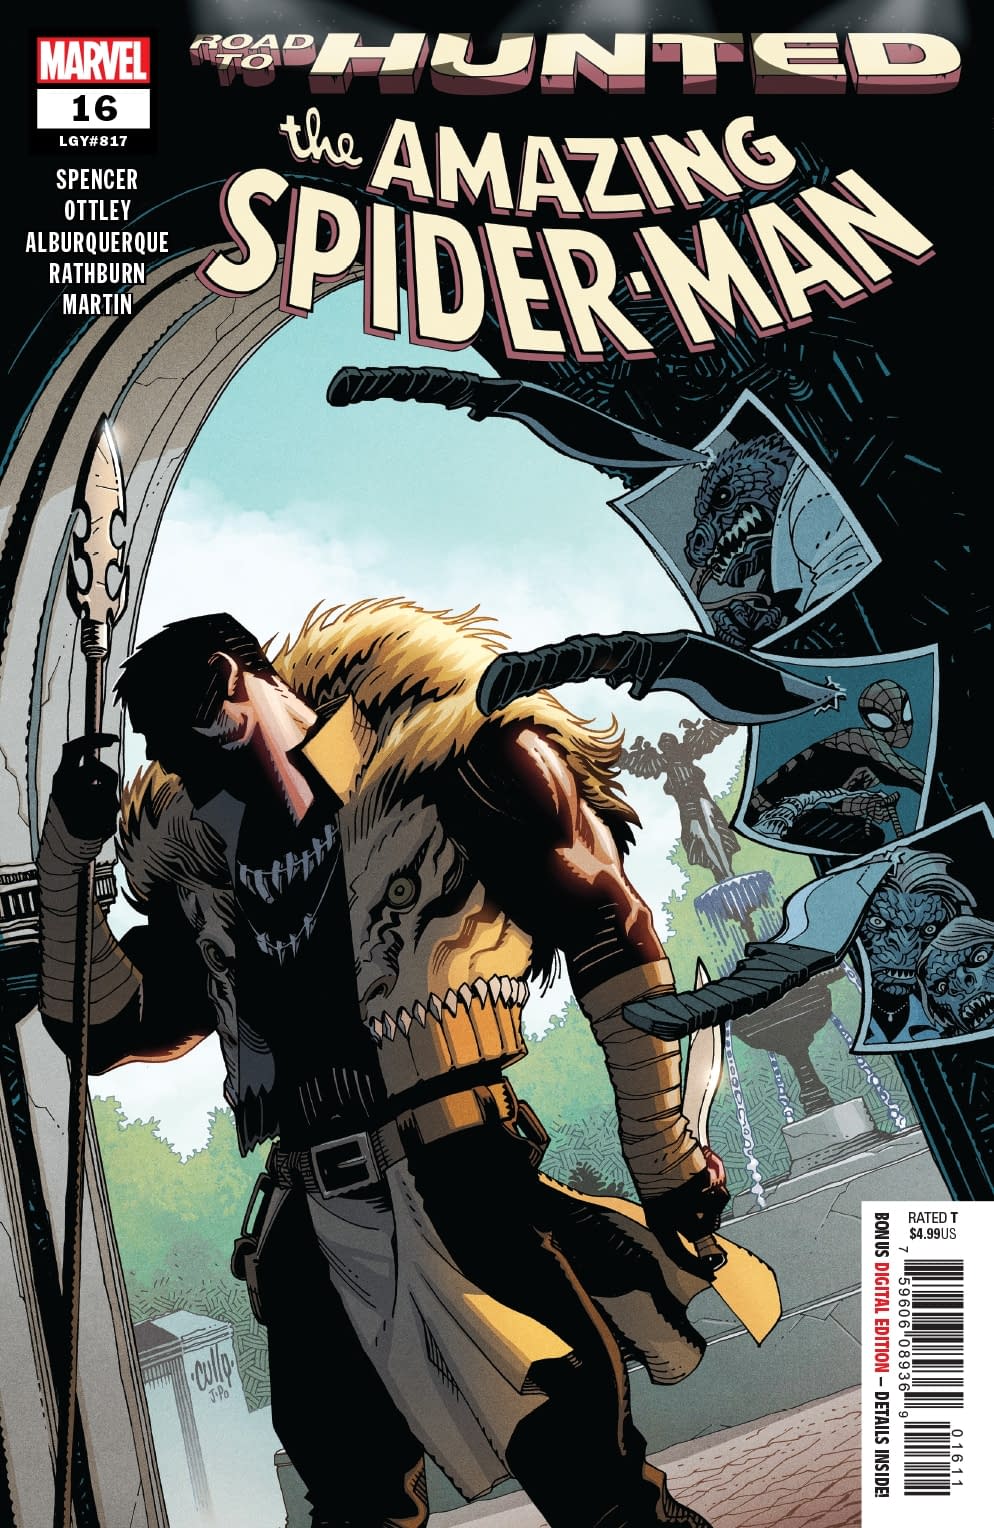 Nick Spencer Rewrites Continuity to Give Kraven His Own Clone Saga in Amazing Spider-Man #16